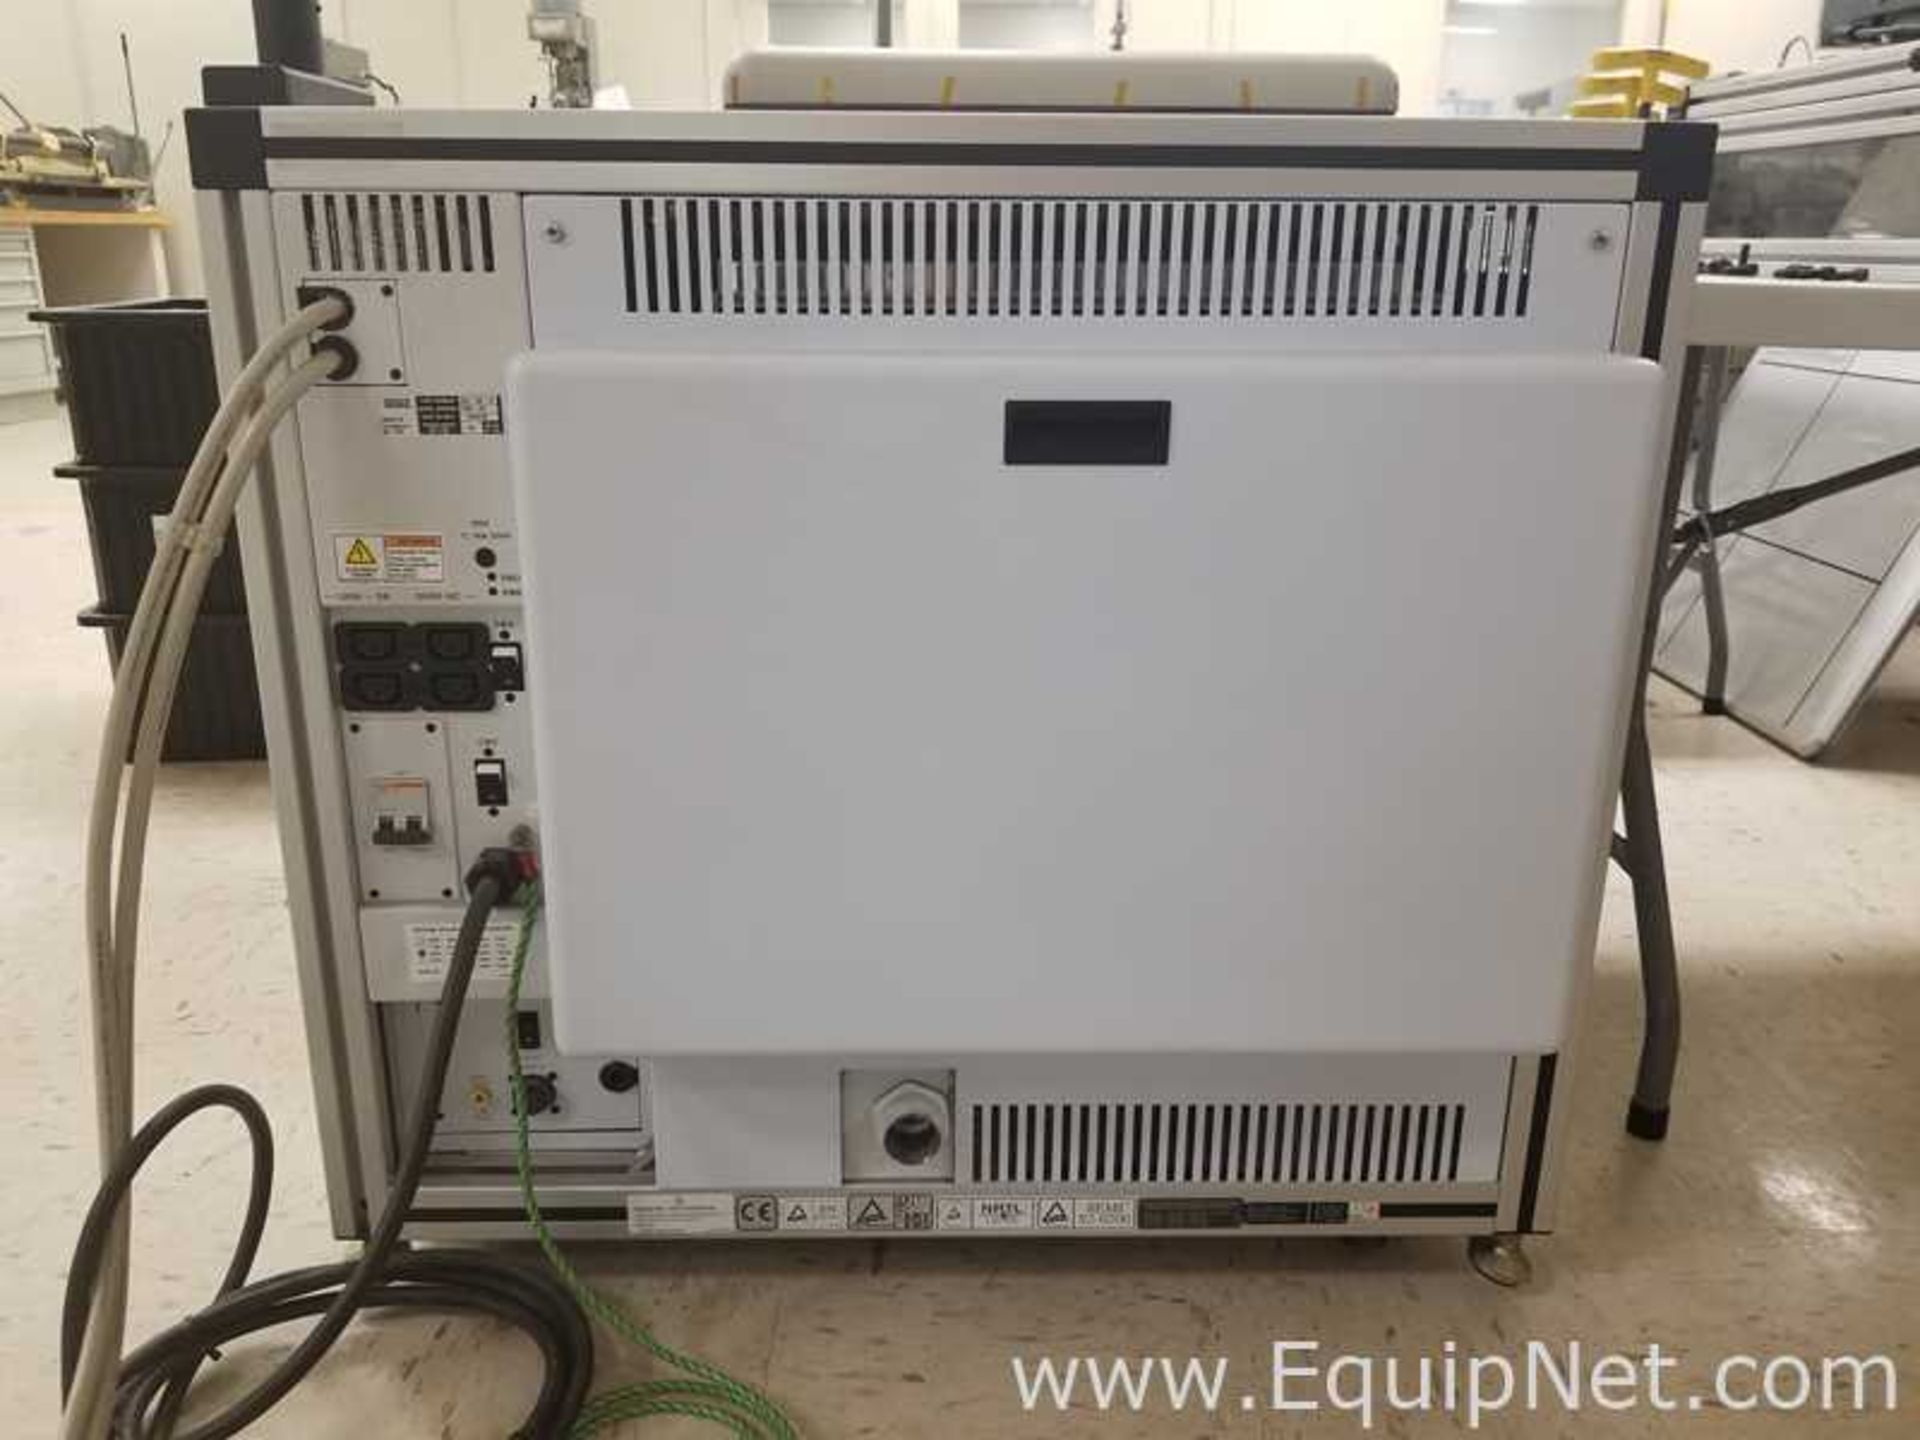 Teradyne SC-108-19 Production Board Test Equipment - Image 2 of 12